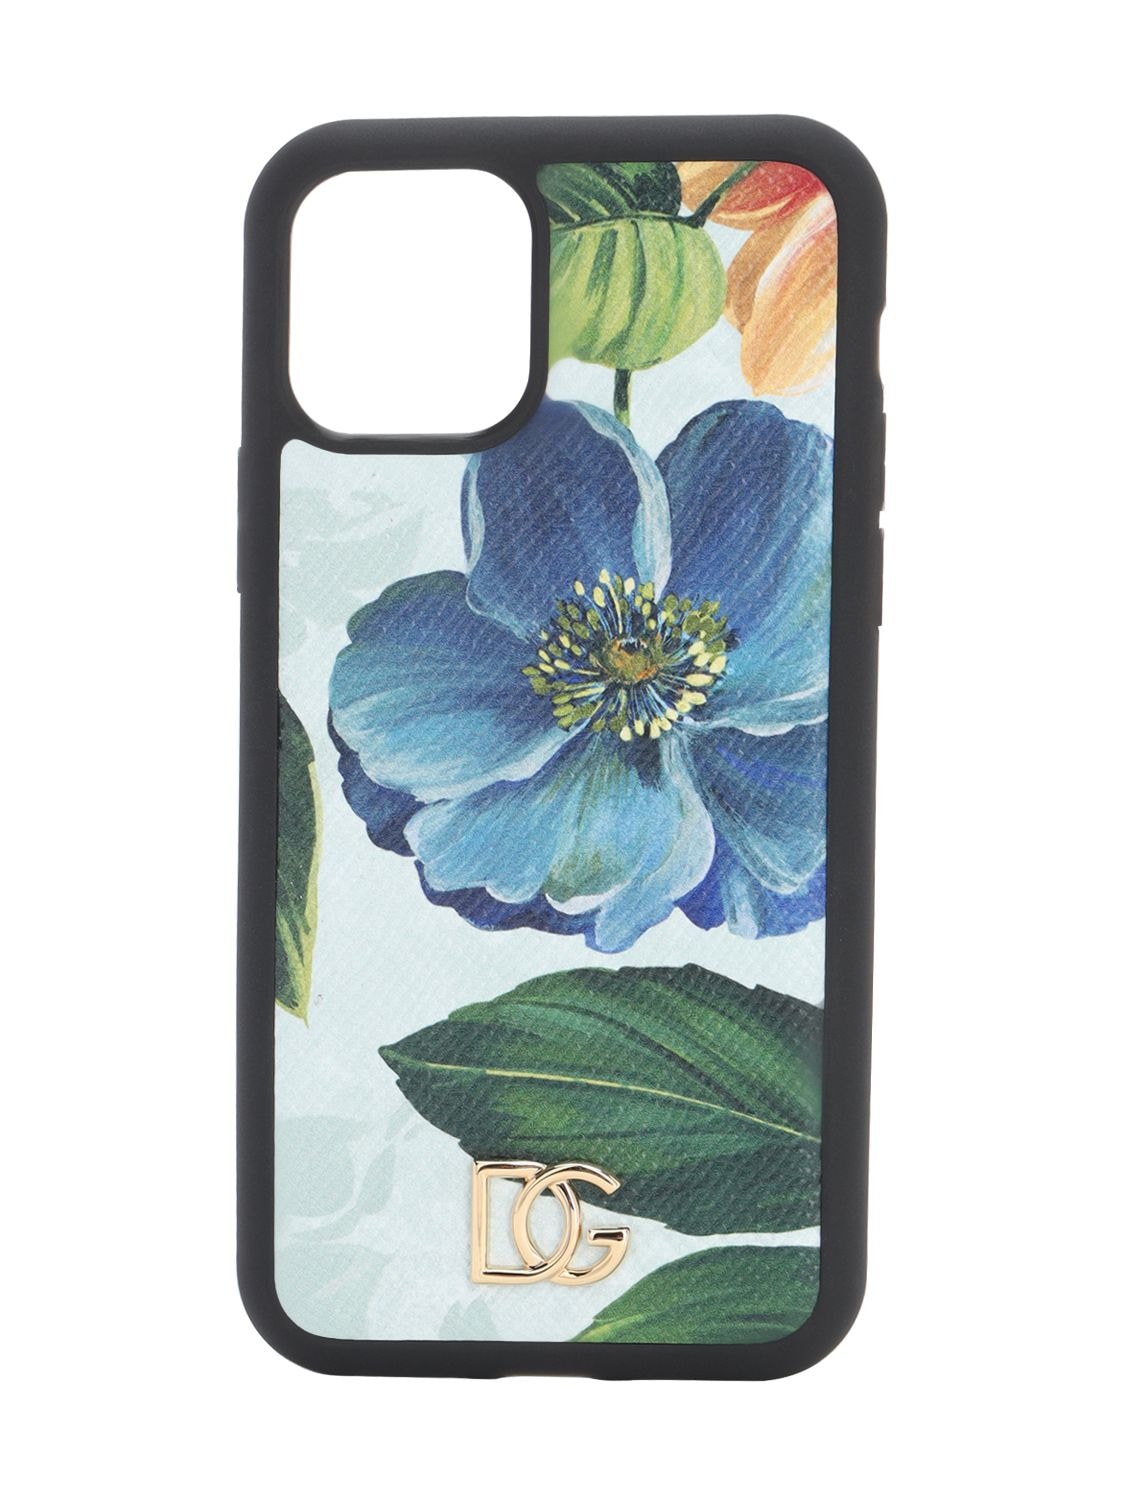 Dolce & Gabbana Printed Leather Iphone 11 Pro Cover In Multicolor,floral